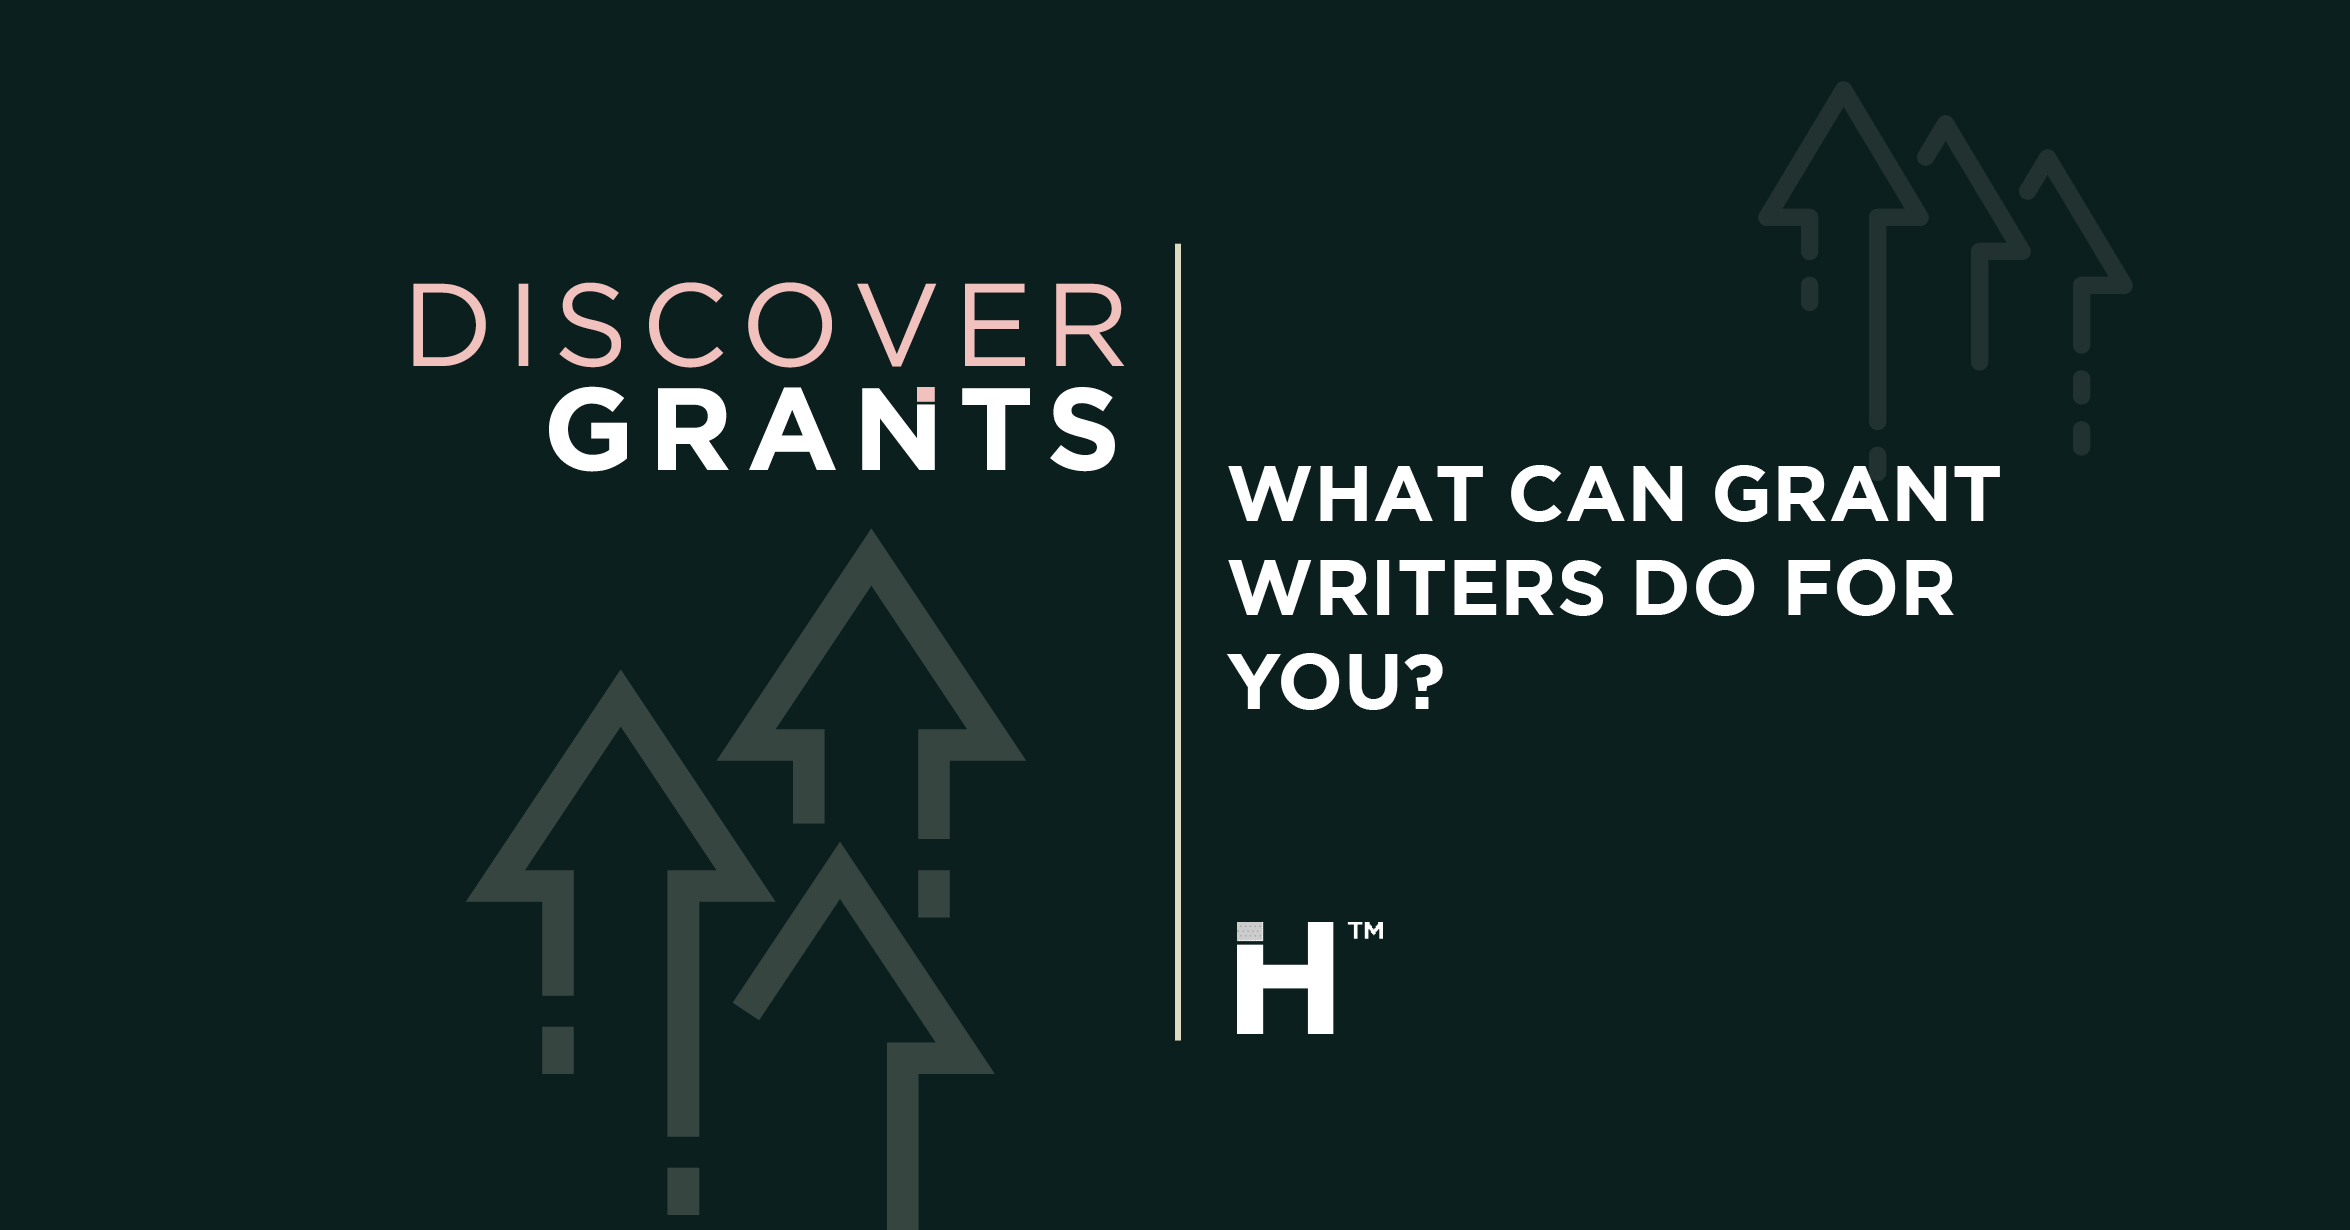 Grant Writers: How Can They Help You?